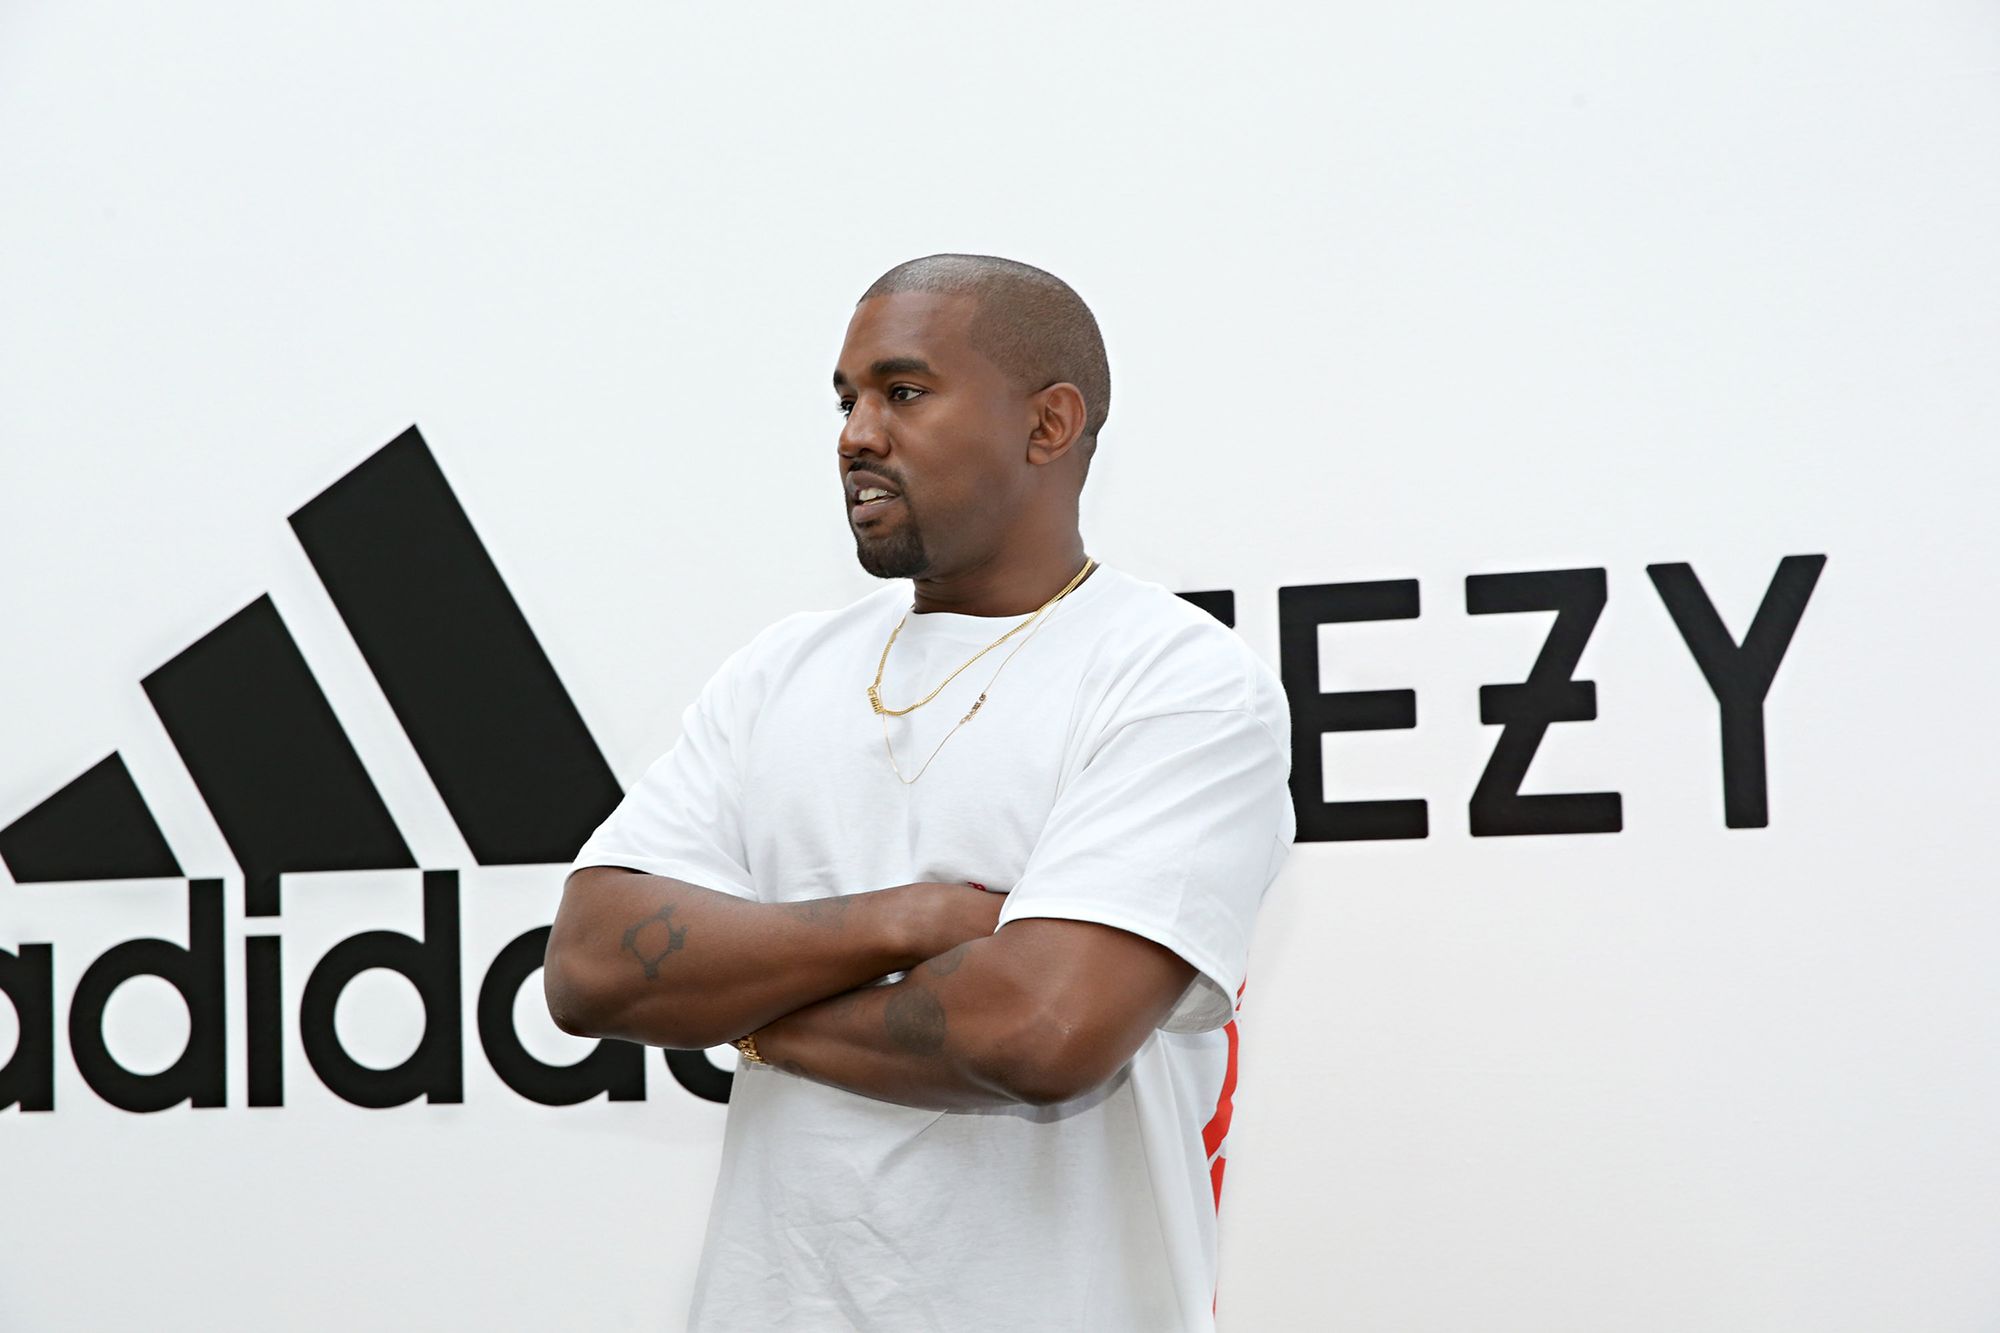 Limestone life Obsession Yeezy without the Ye? Who is new "sole" owner | CNN Business